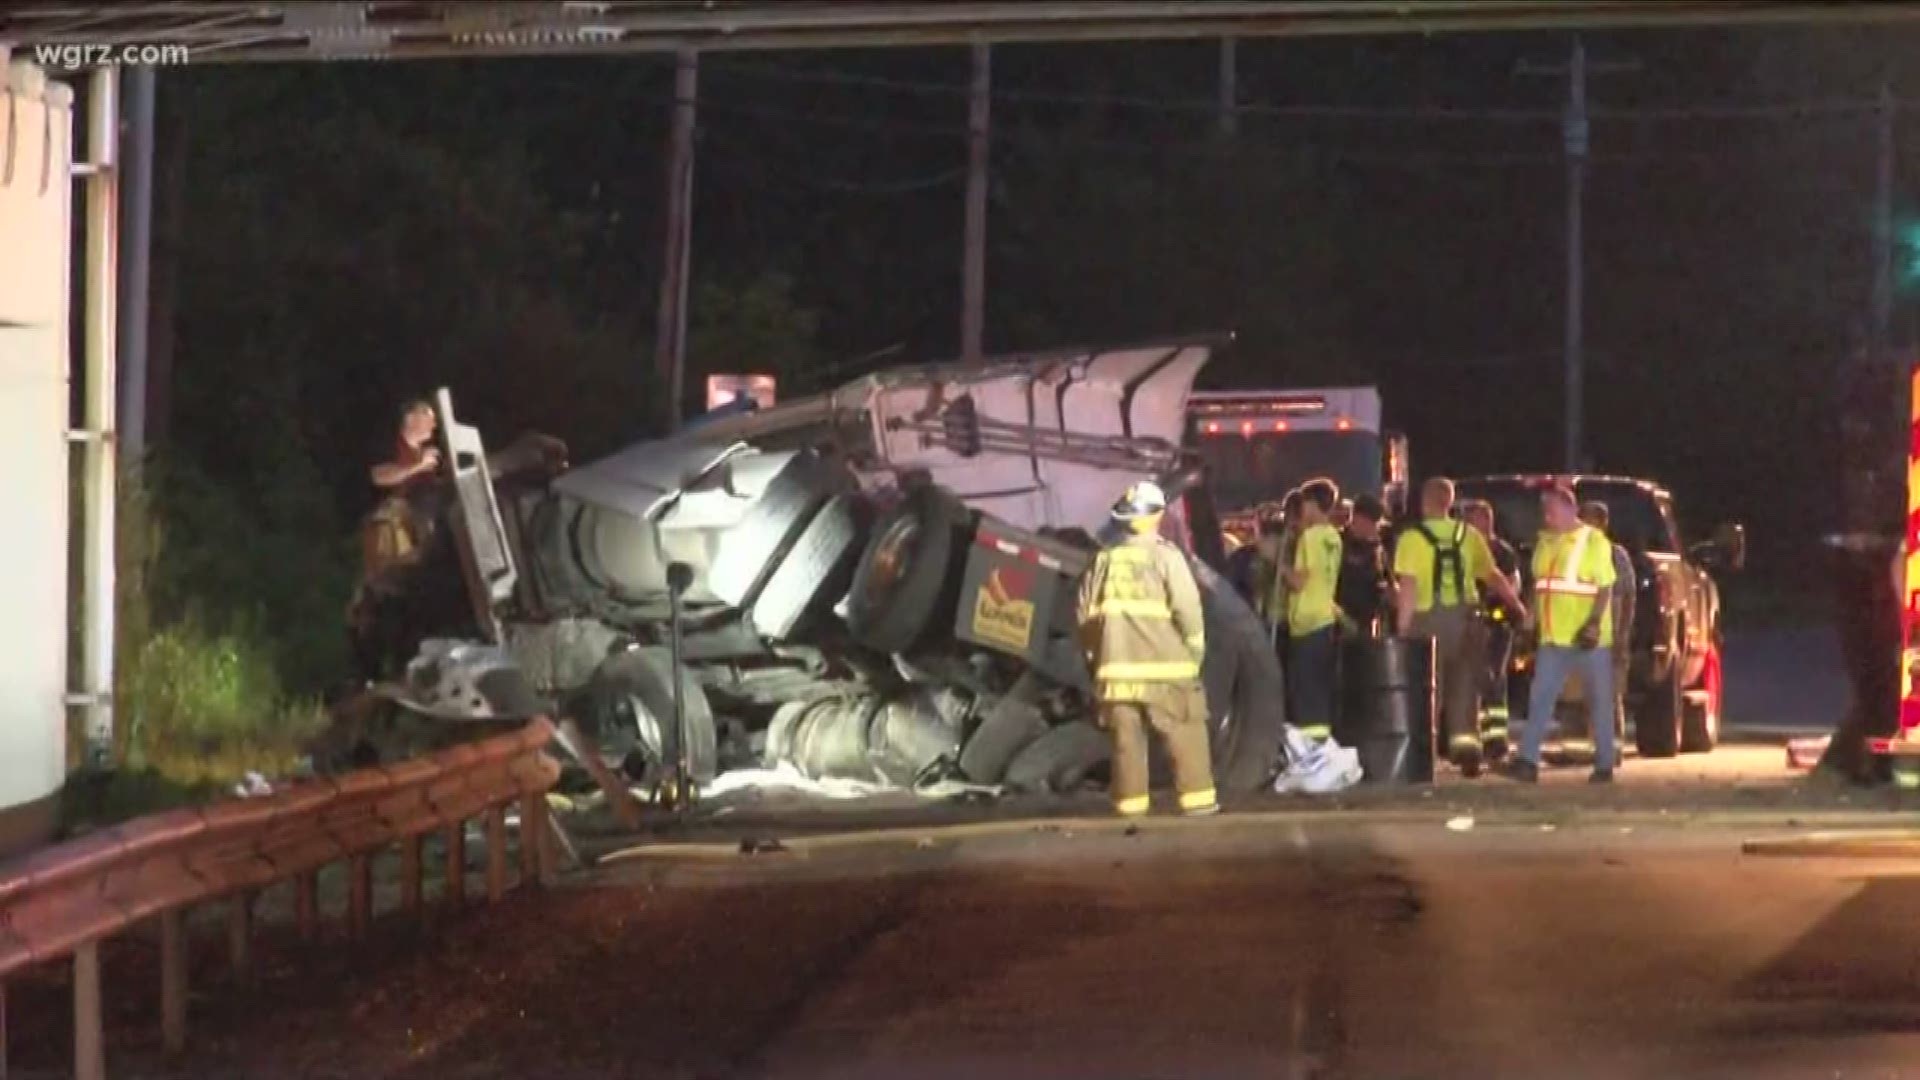 tractor trailer went off a thruway overpass... and crashed onto route 5 in pembroke.